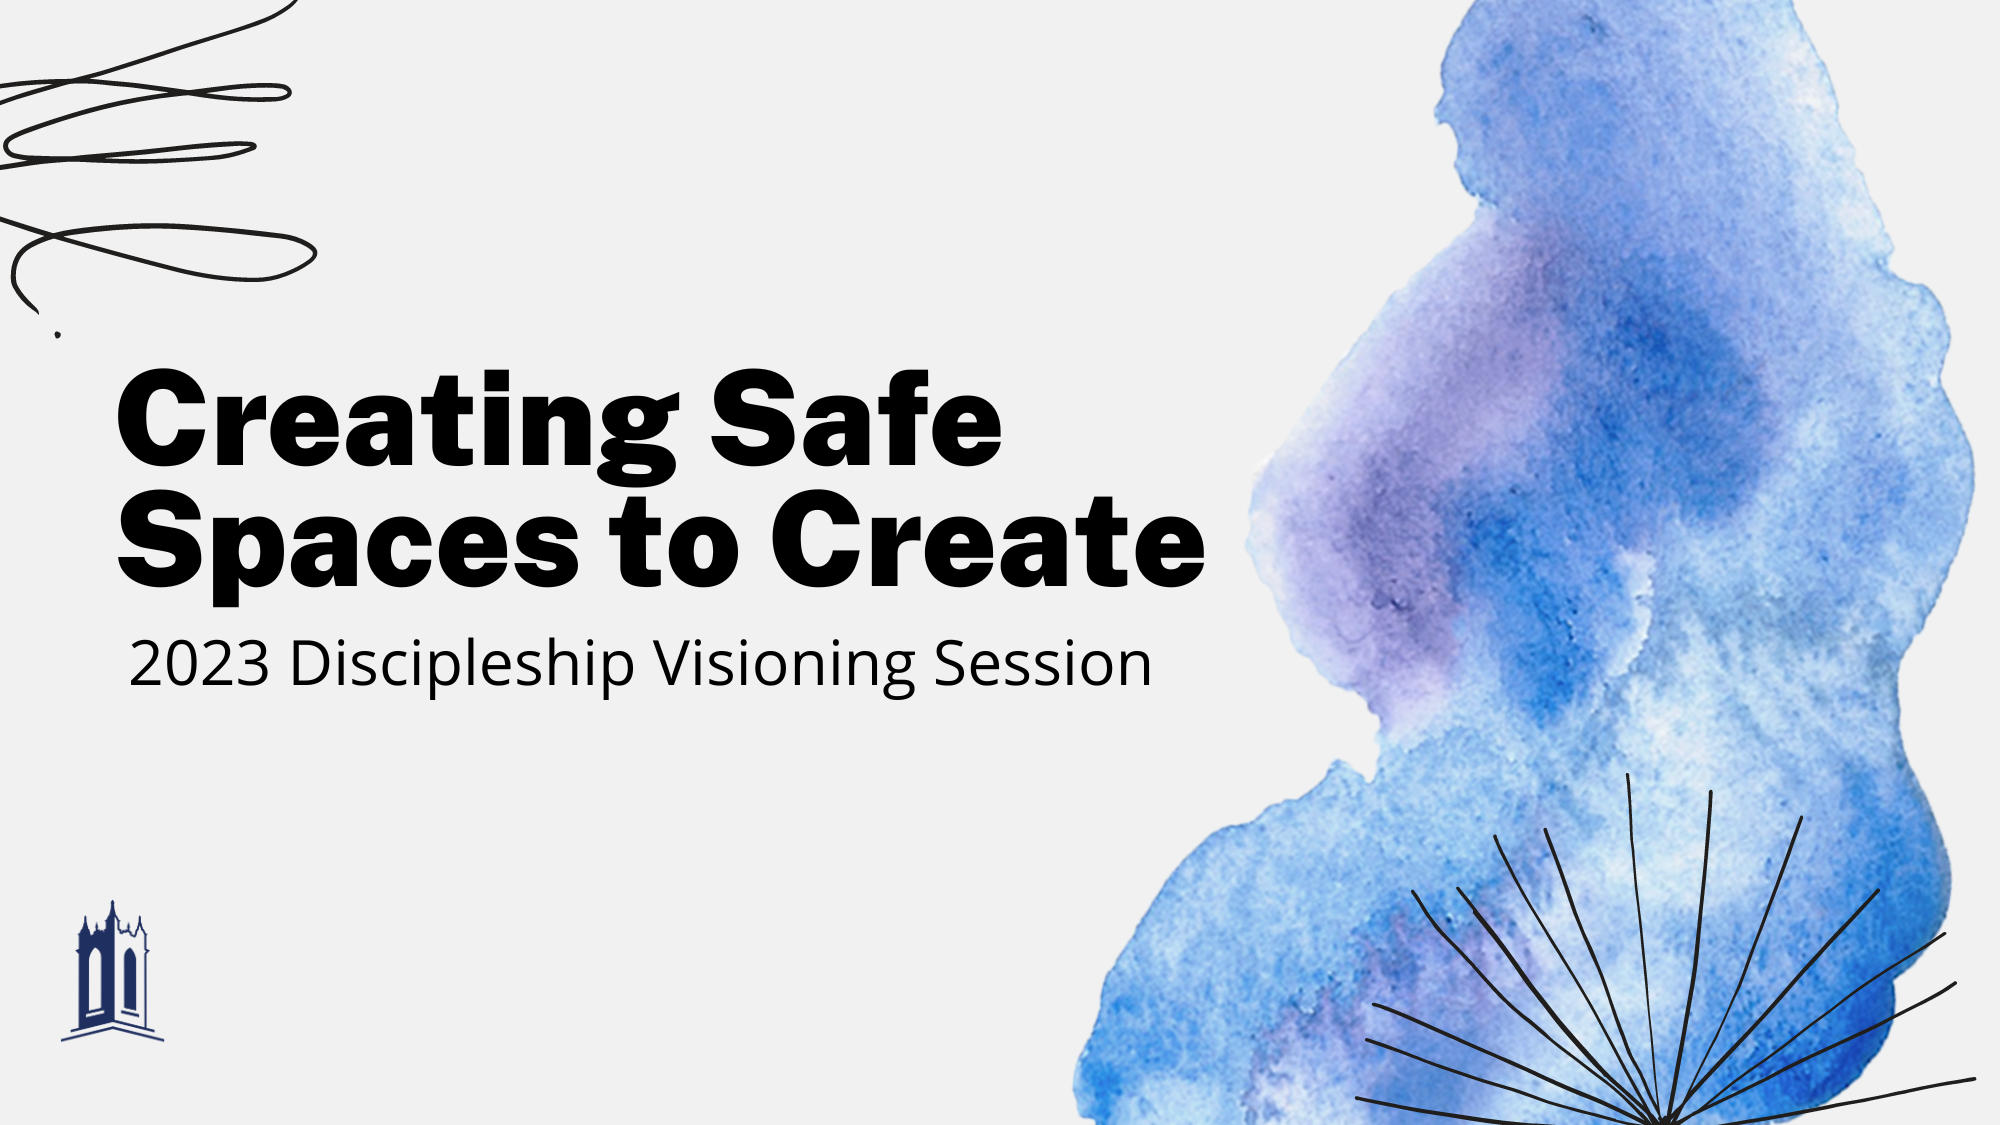 Creating Safe Spaces to Create: 2023 Discipleship Ideation Session